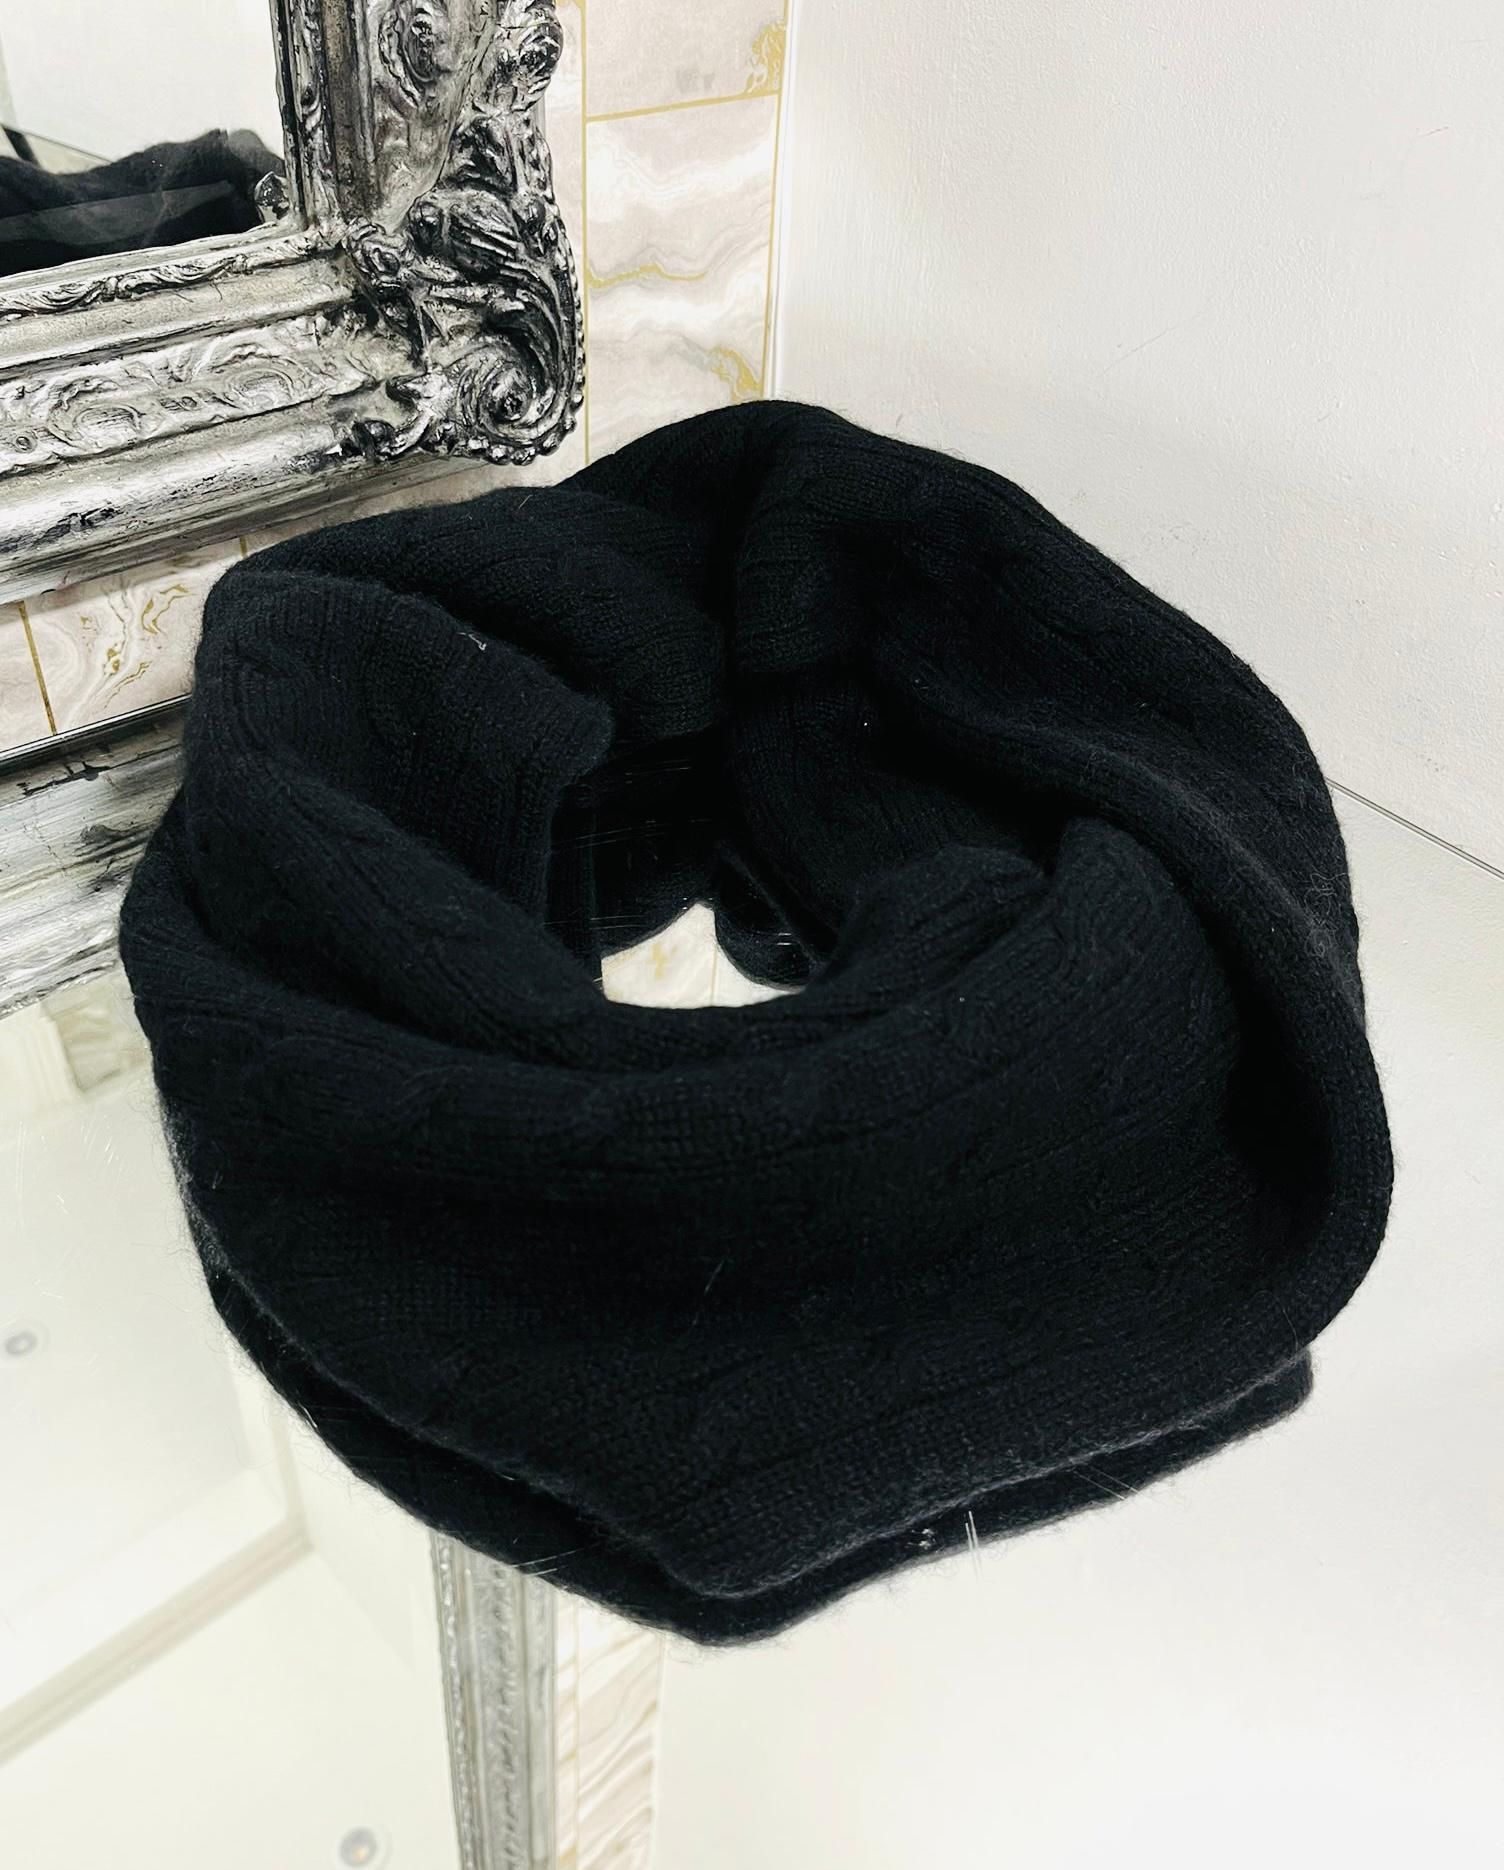 Ralph Lauren Cashmere, Alpaca & Wool Snood In Excellent Condition For Sale In London, GB